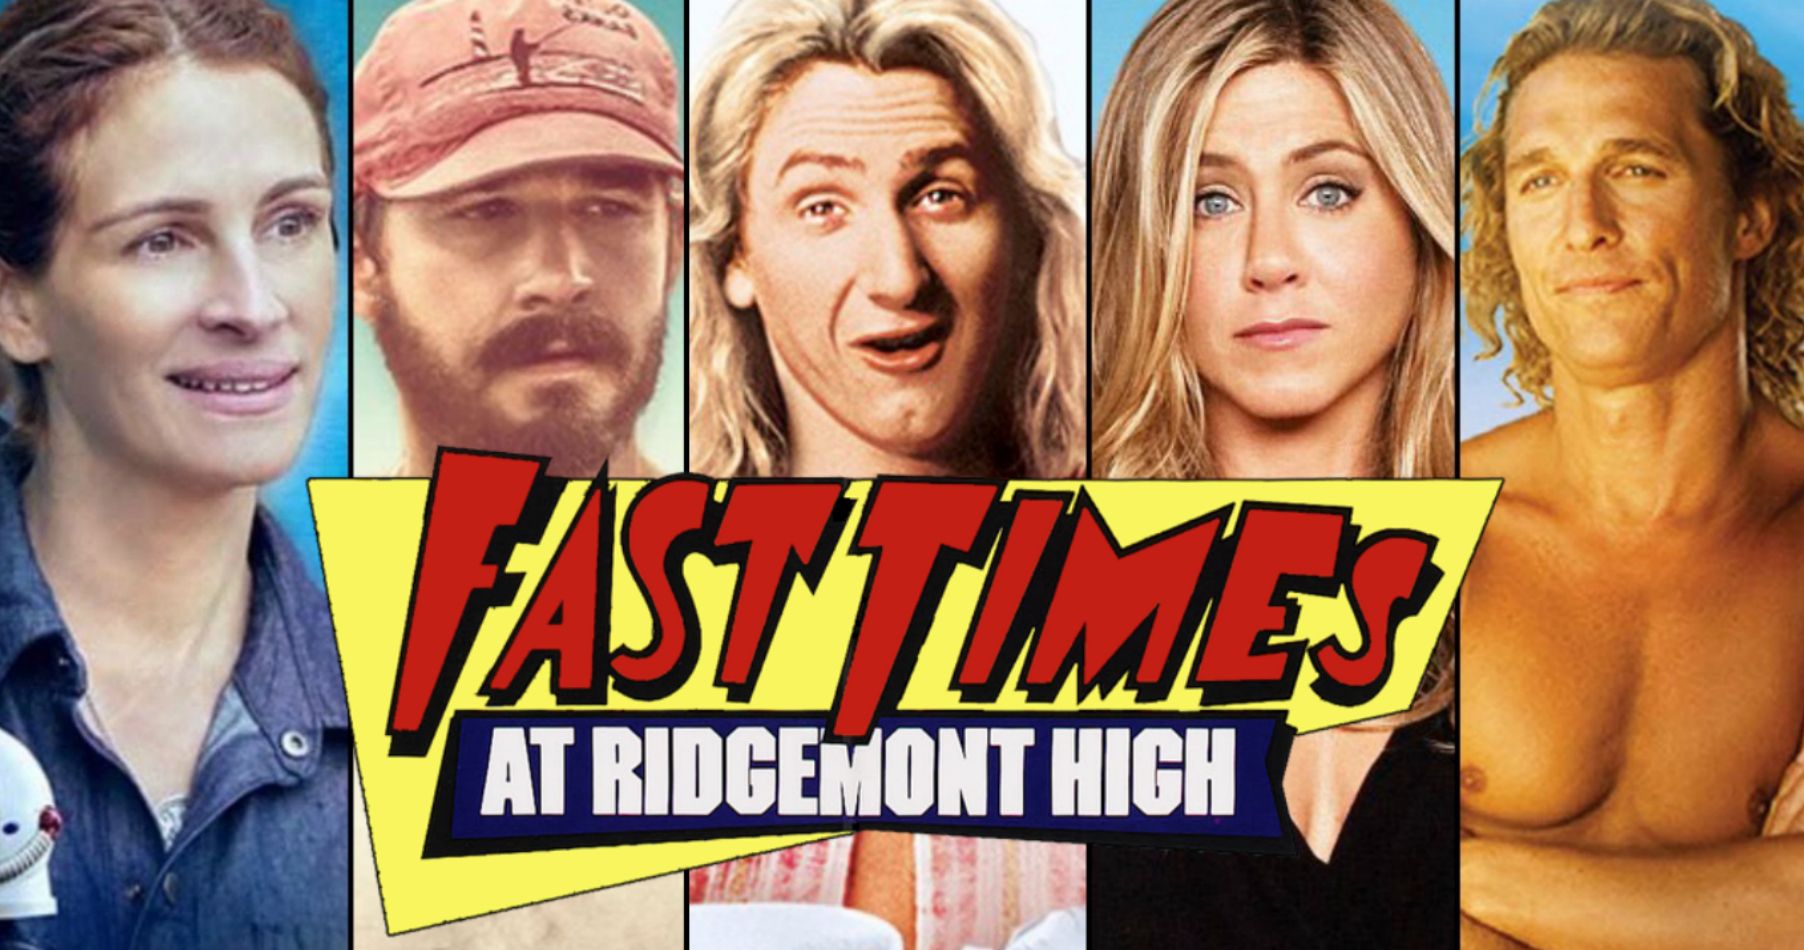 Fast Times at Ridgemont High Virtual Table Read Gets an All-Star Cast Led by Sean Penn